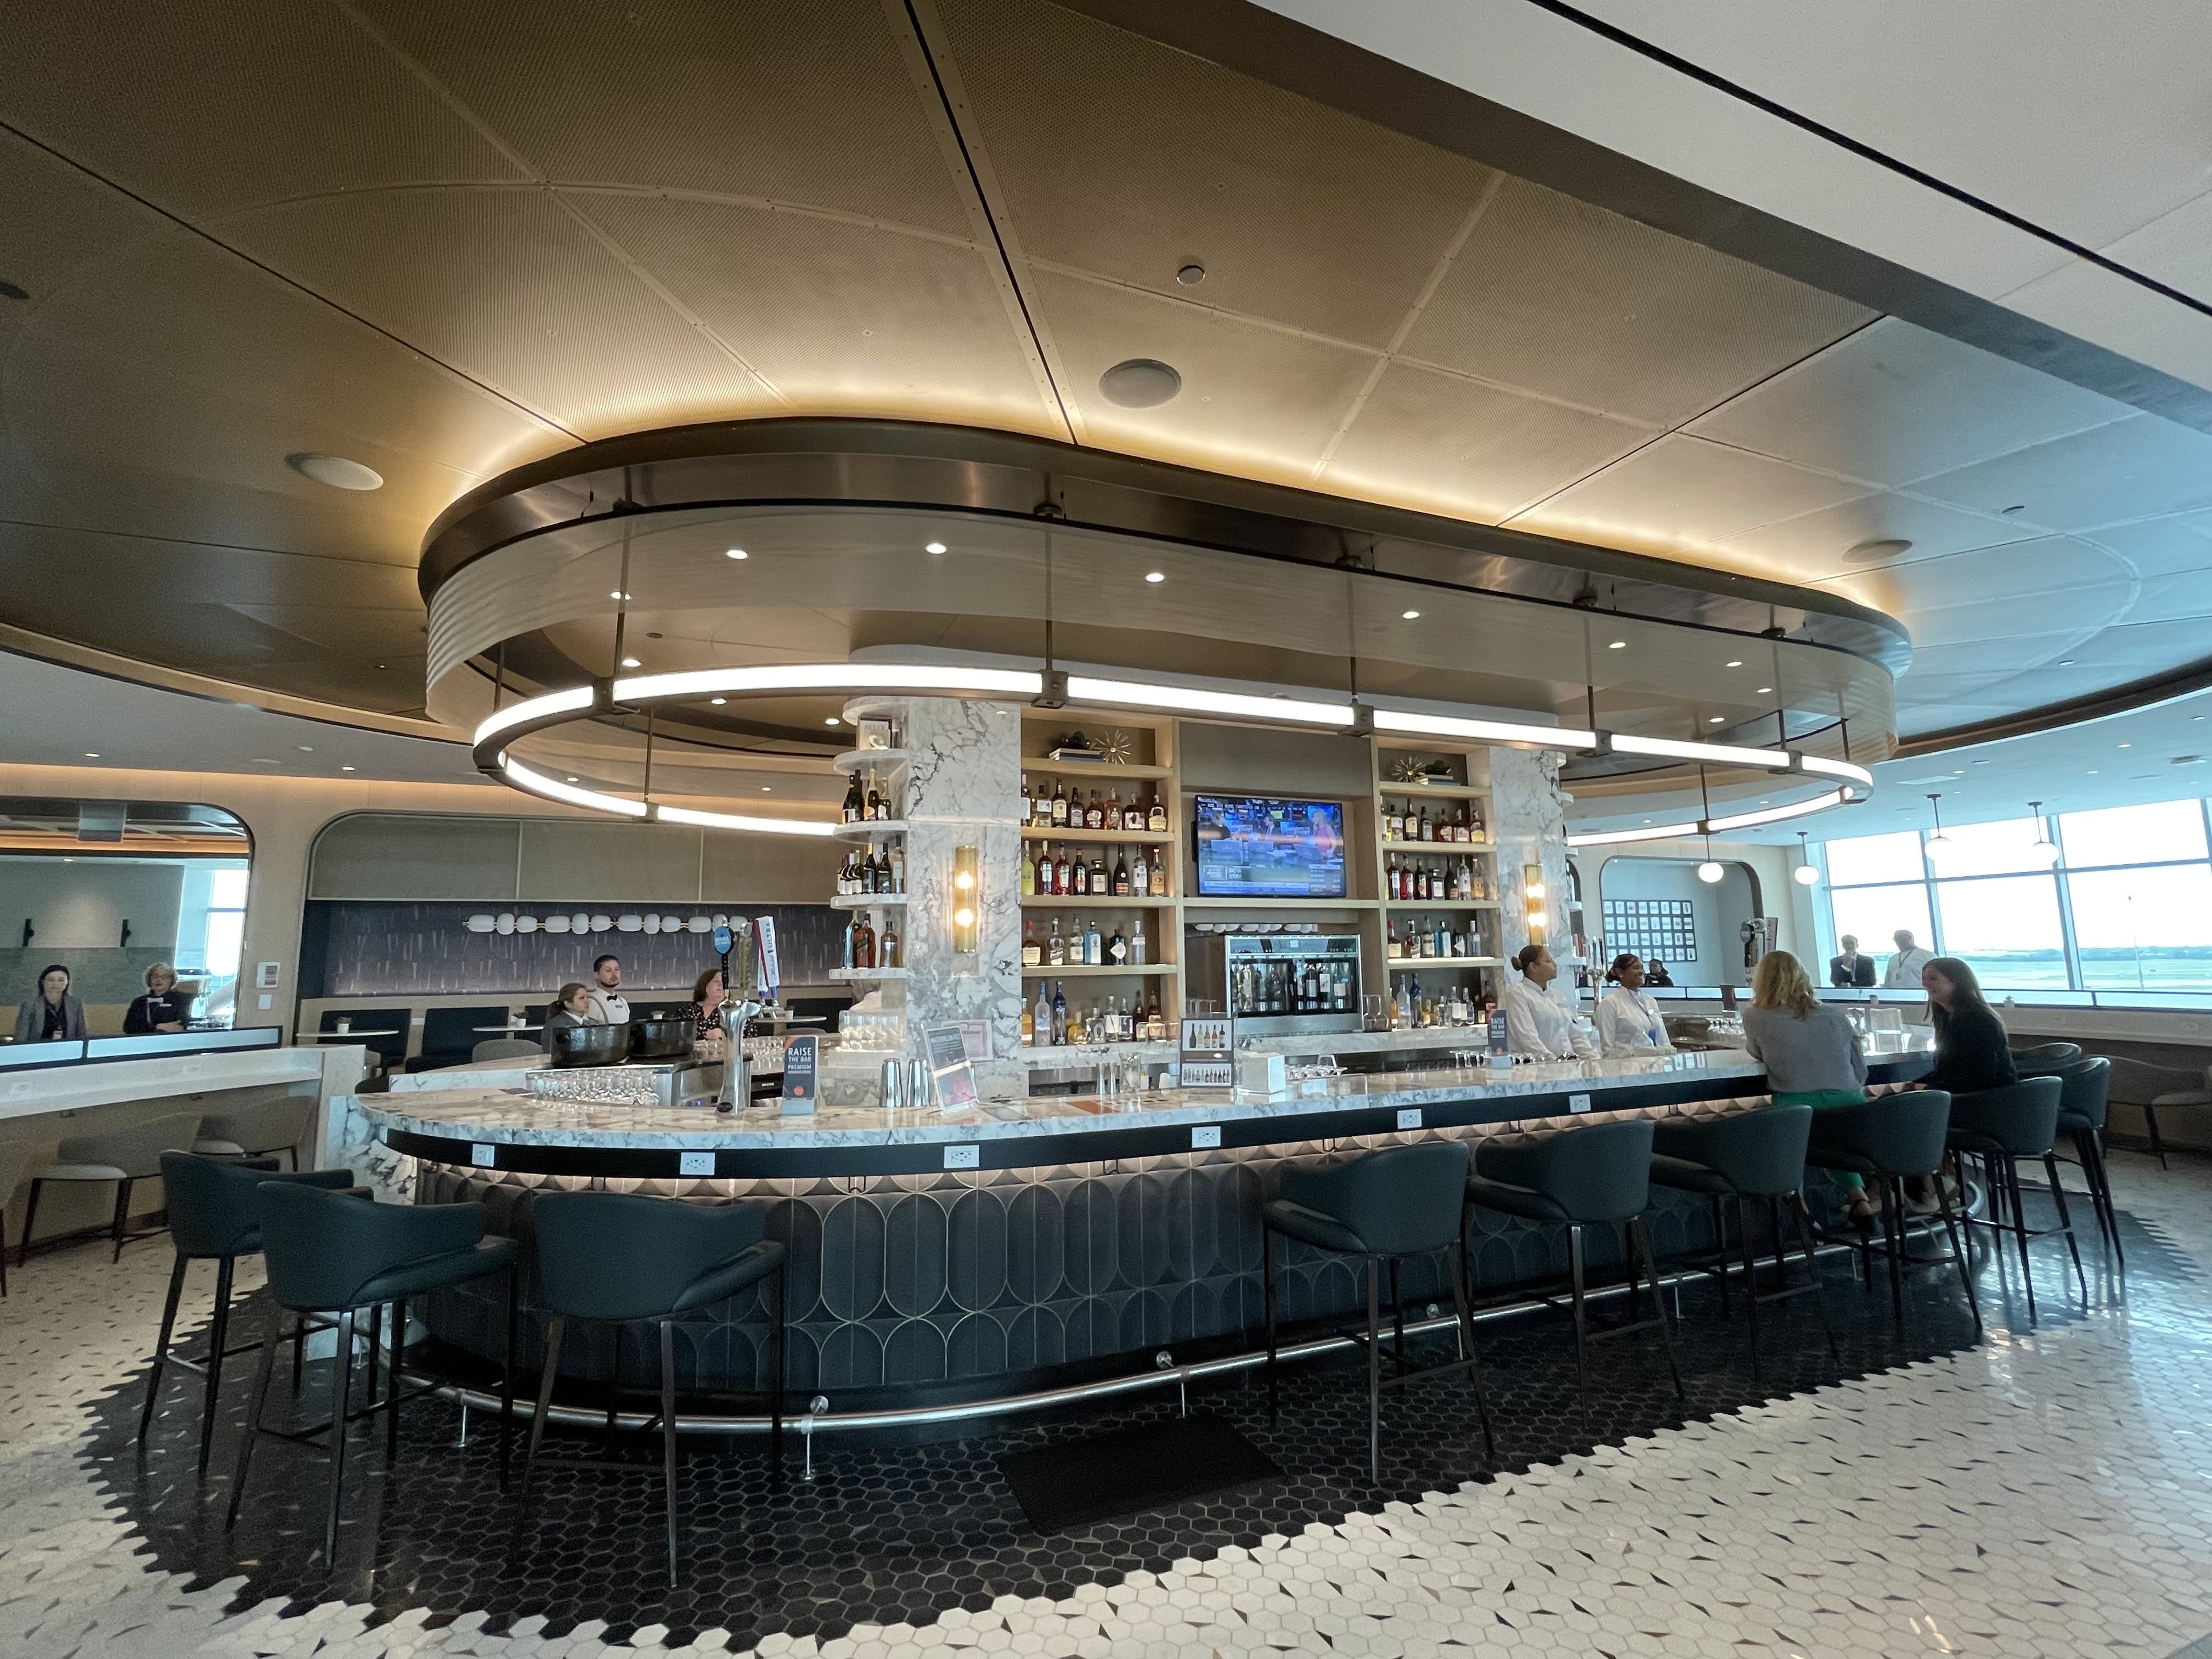 Delta is opening a new category of premium airport lounges this year